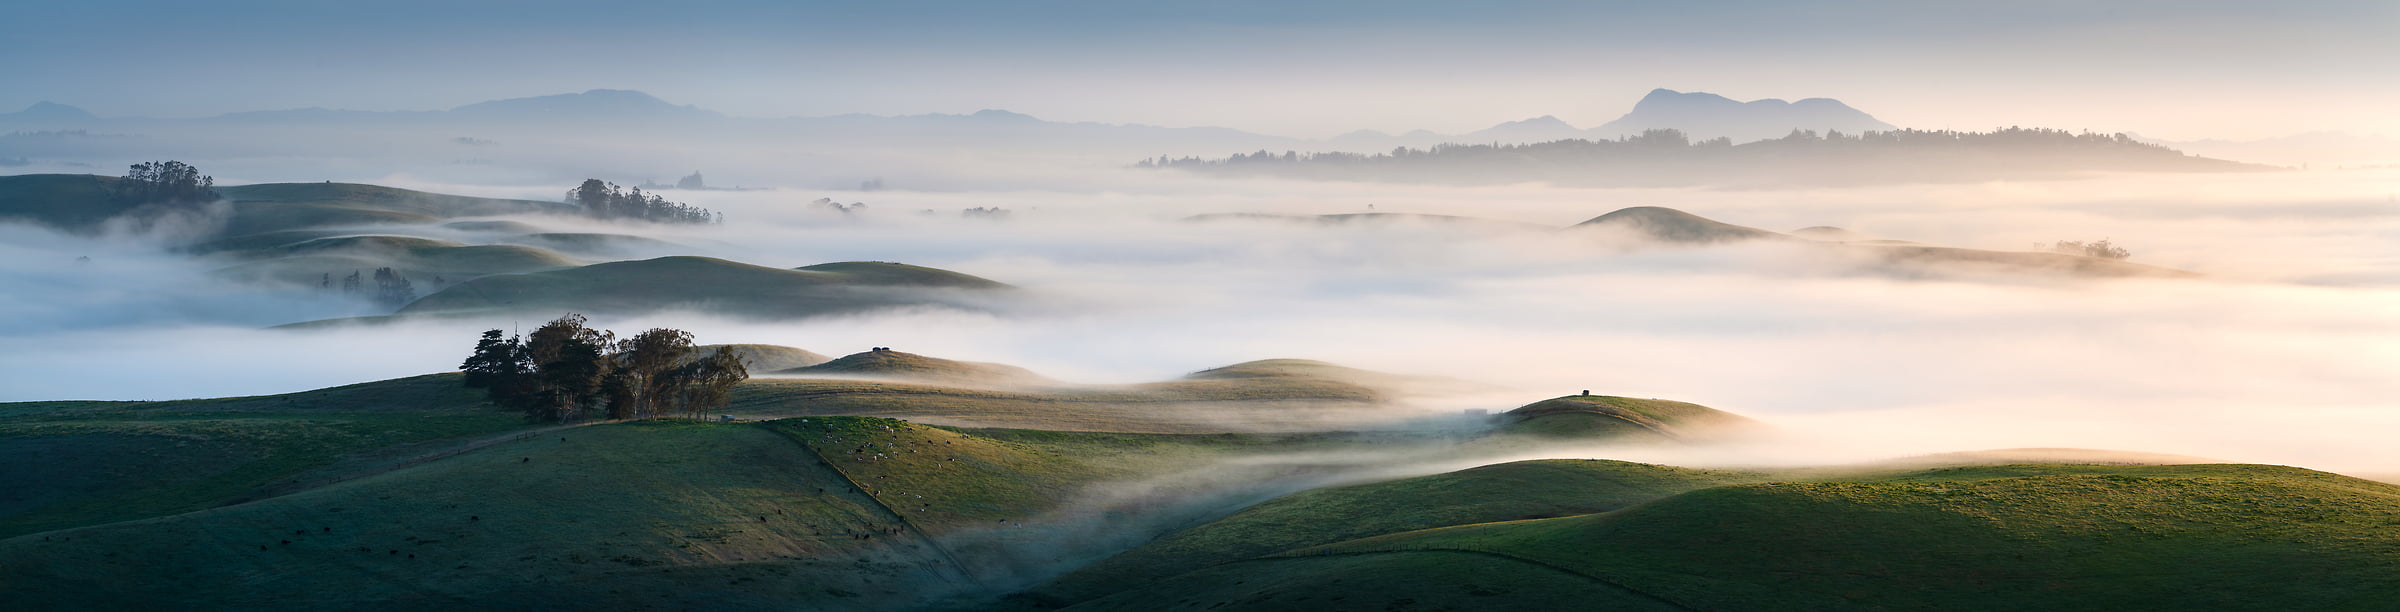 210 megapixels! A very high resolution, large-format VAST photo print of a Sonoma landscape with fog and rolling hills; photograph created by Jeff Lewis in Marin County, California